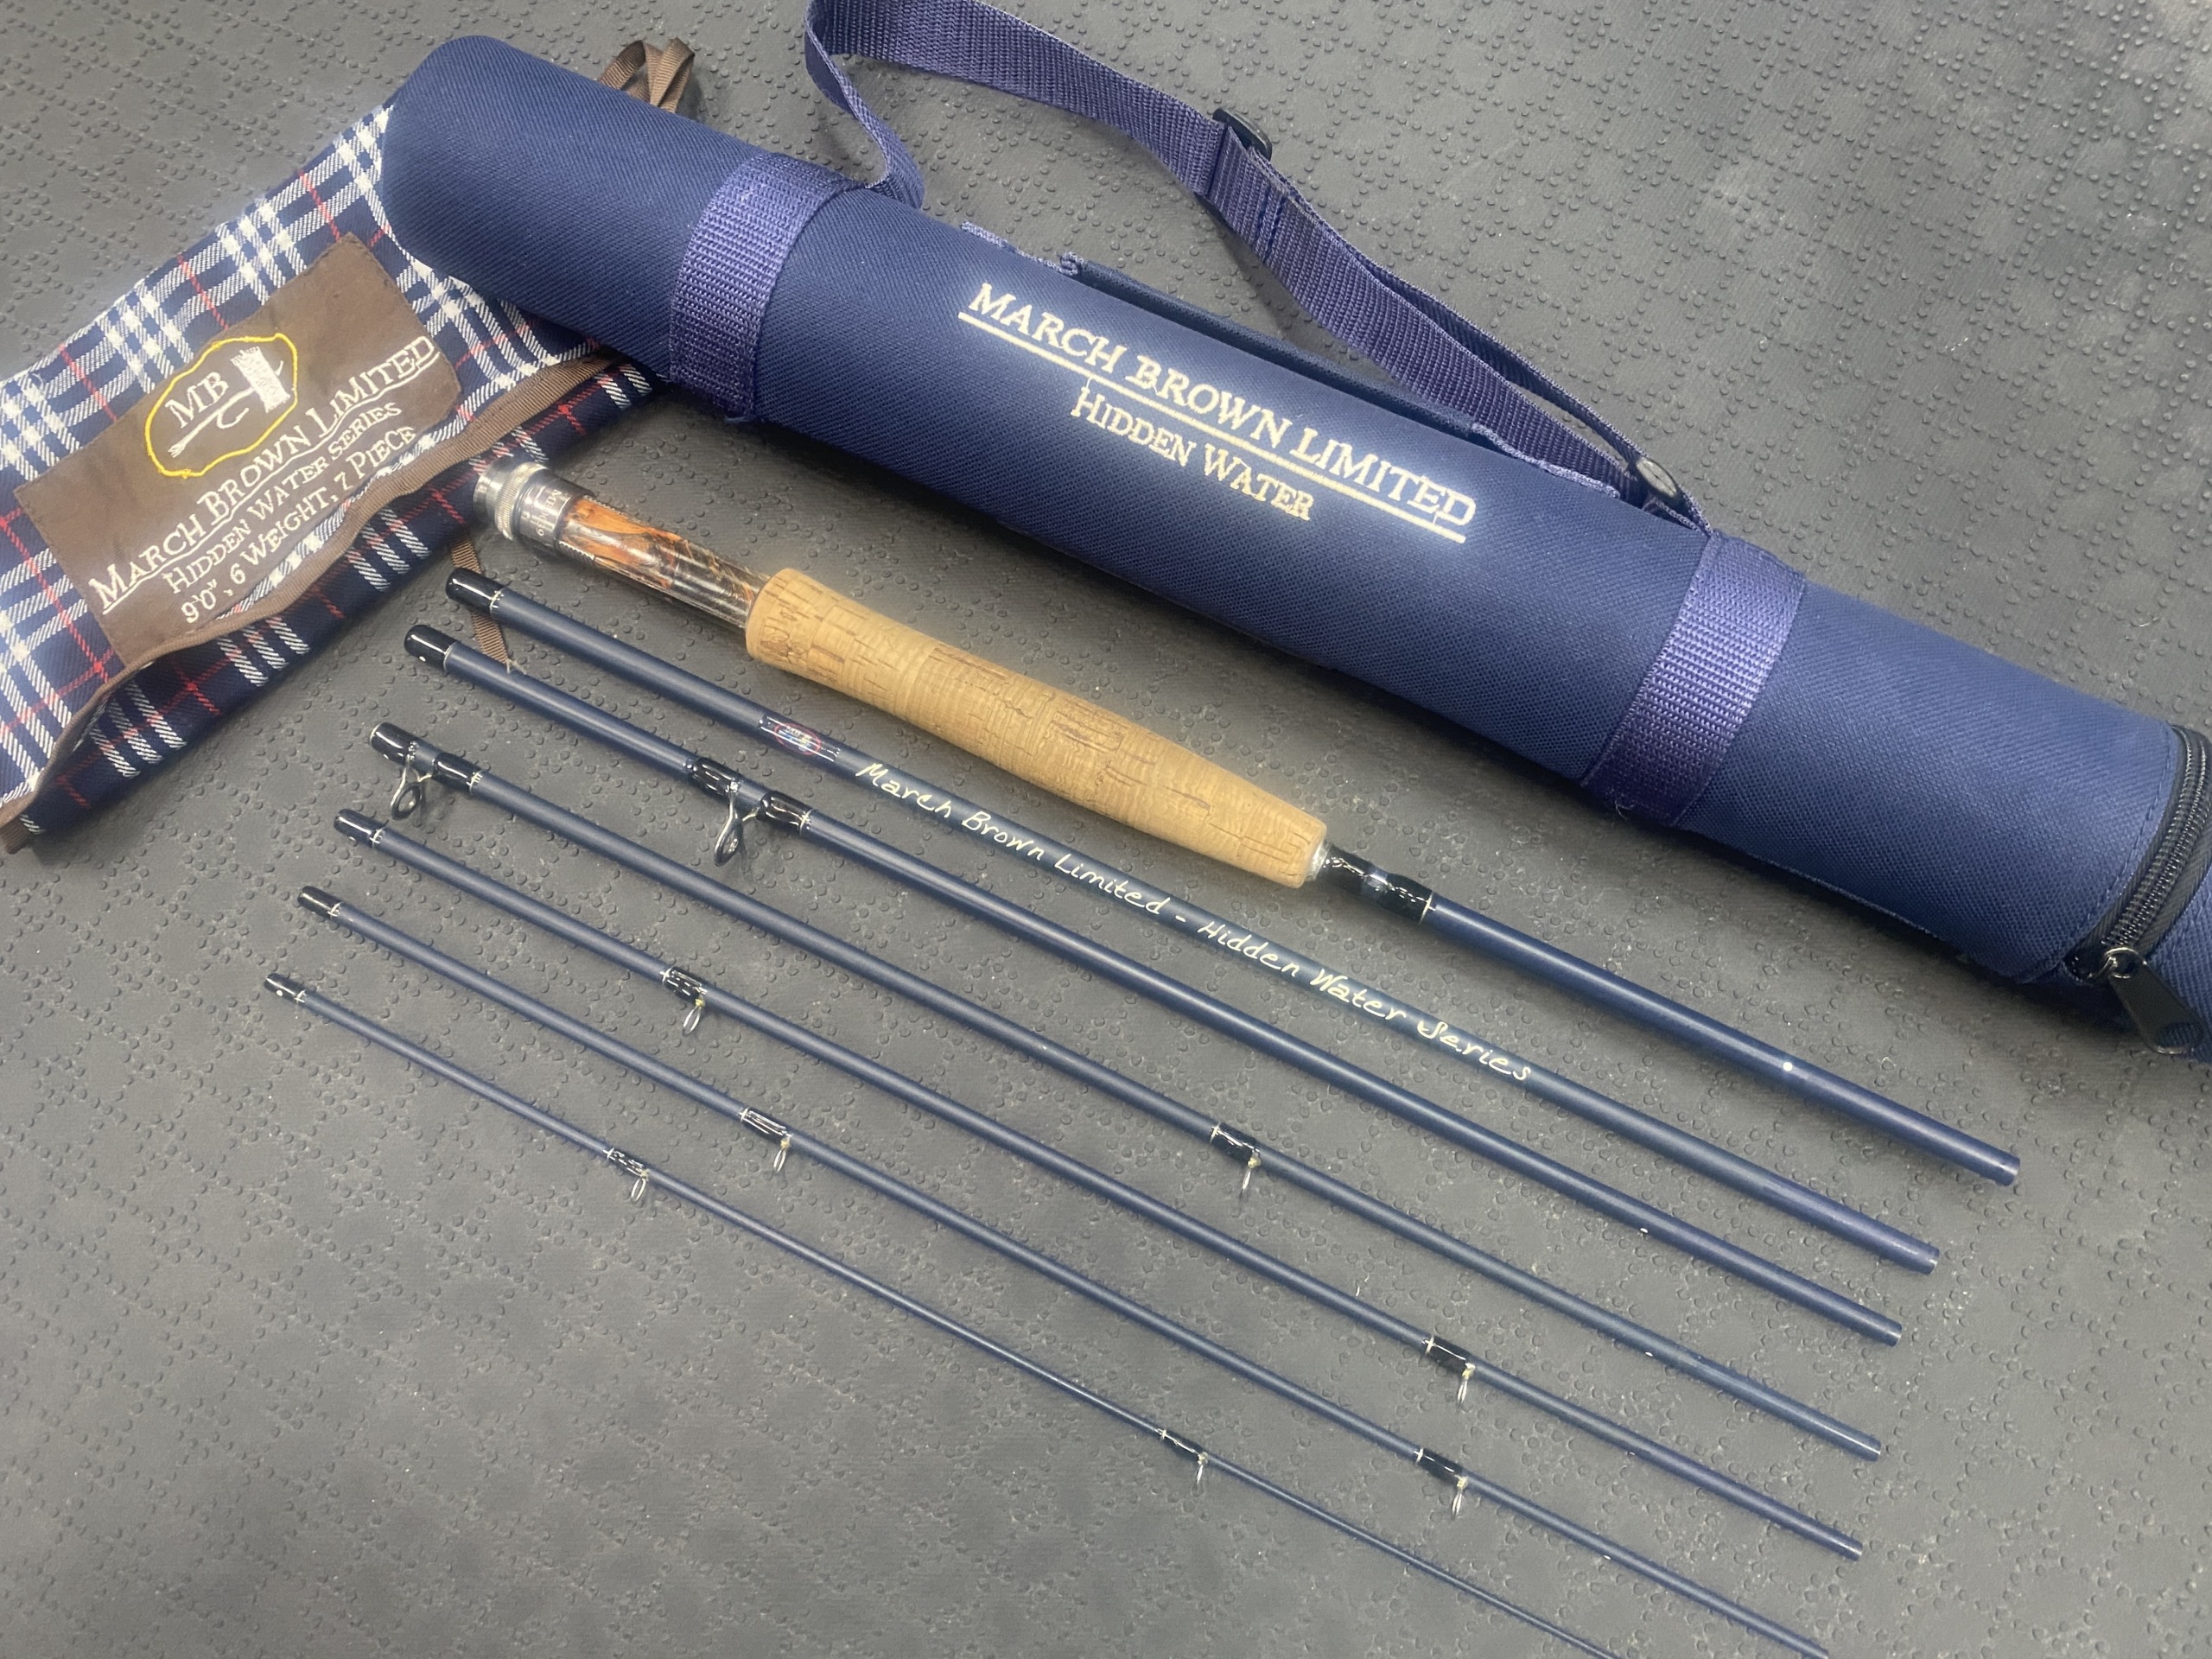 SOLD! – March Brown – Limited Hidden Water Series Travel Rod – 9